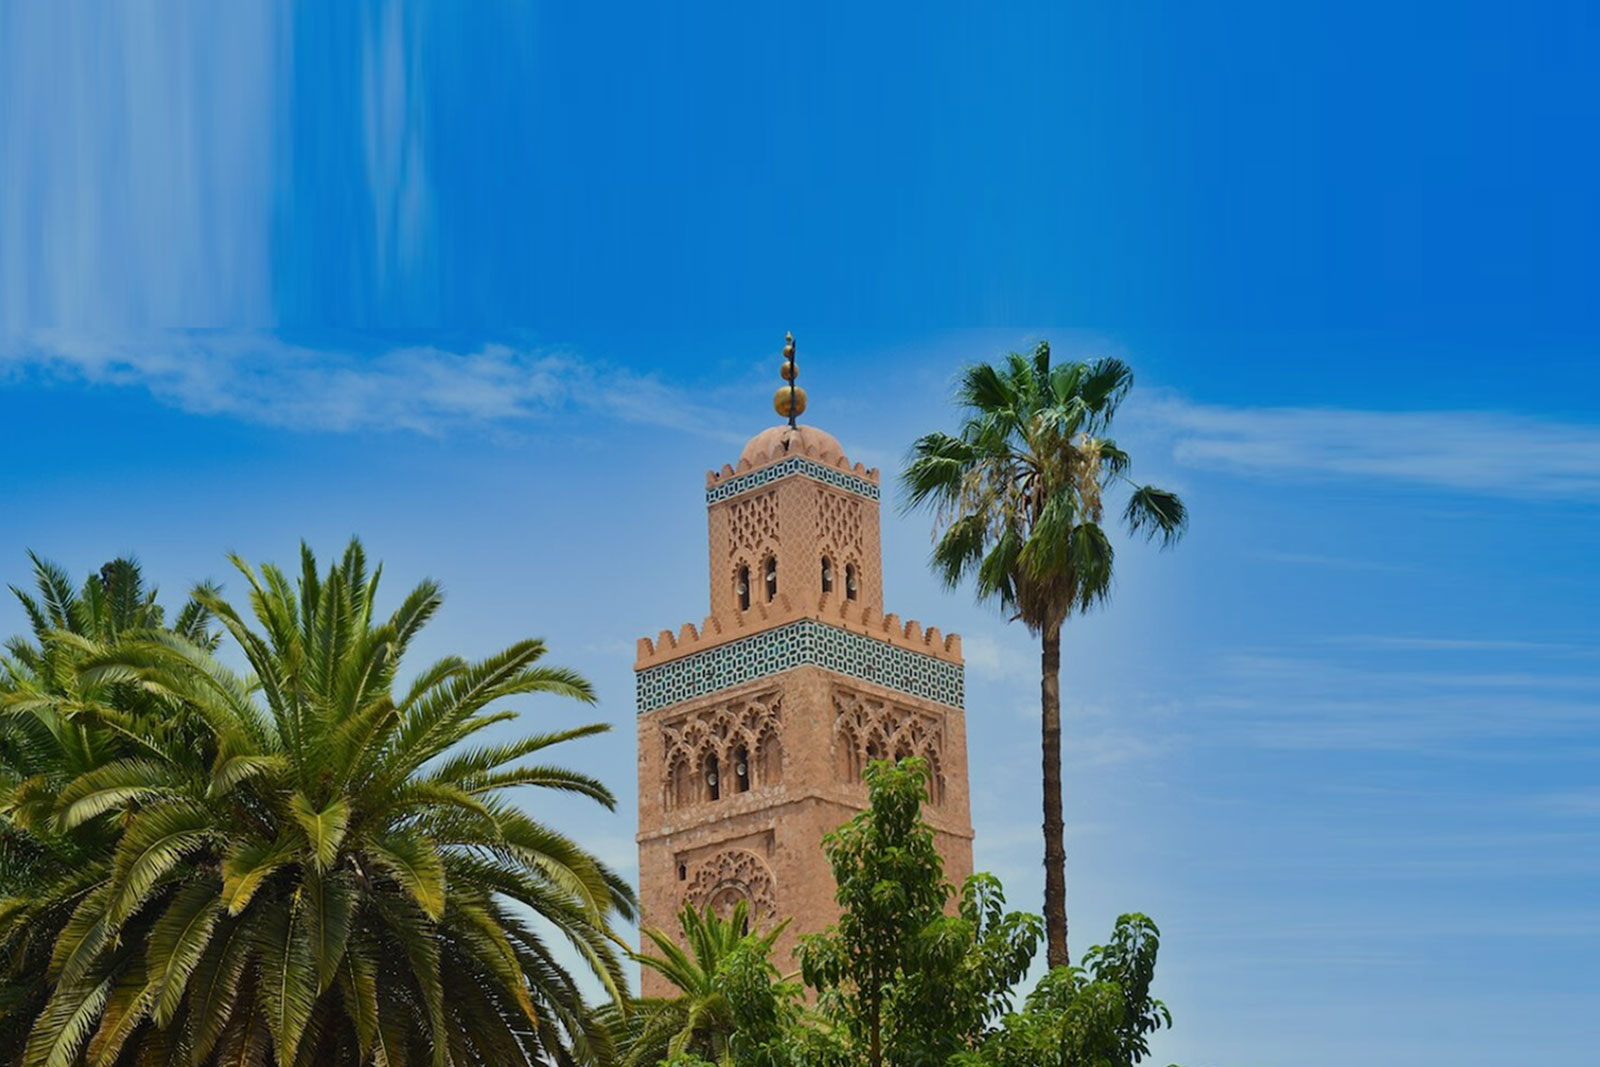 Excursion and activities in marrakech